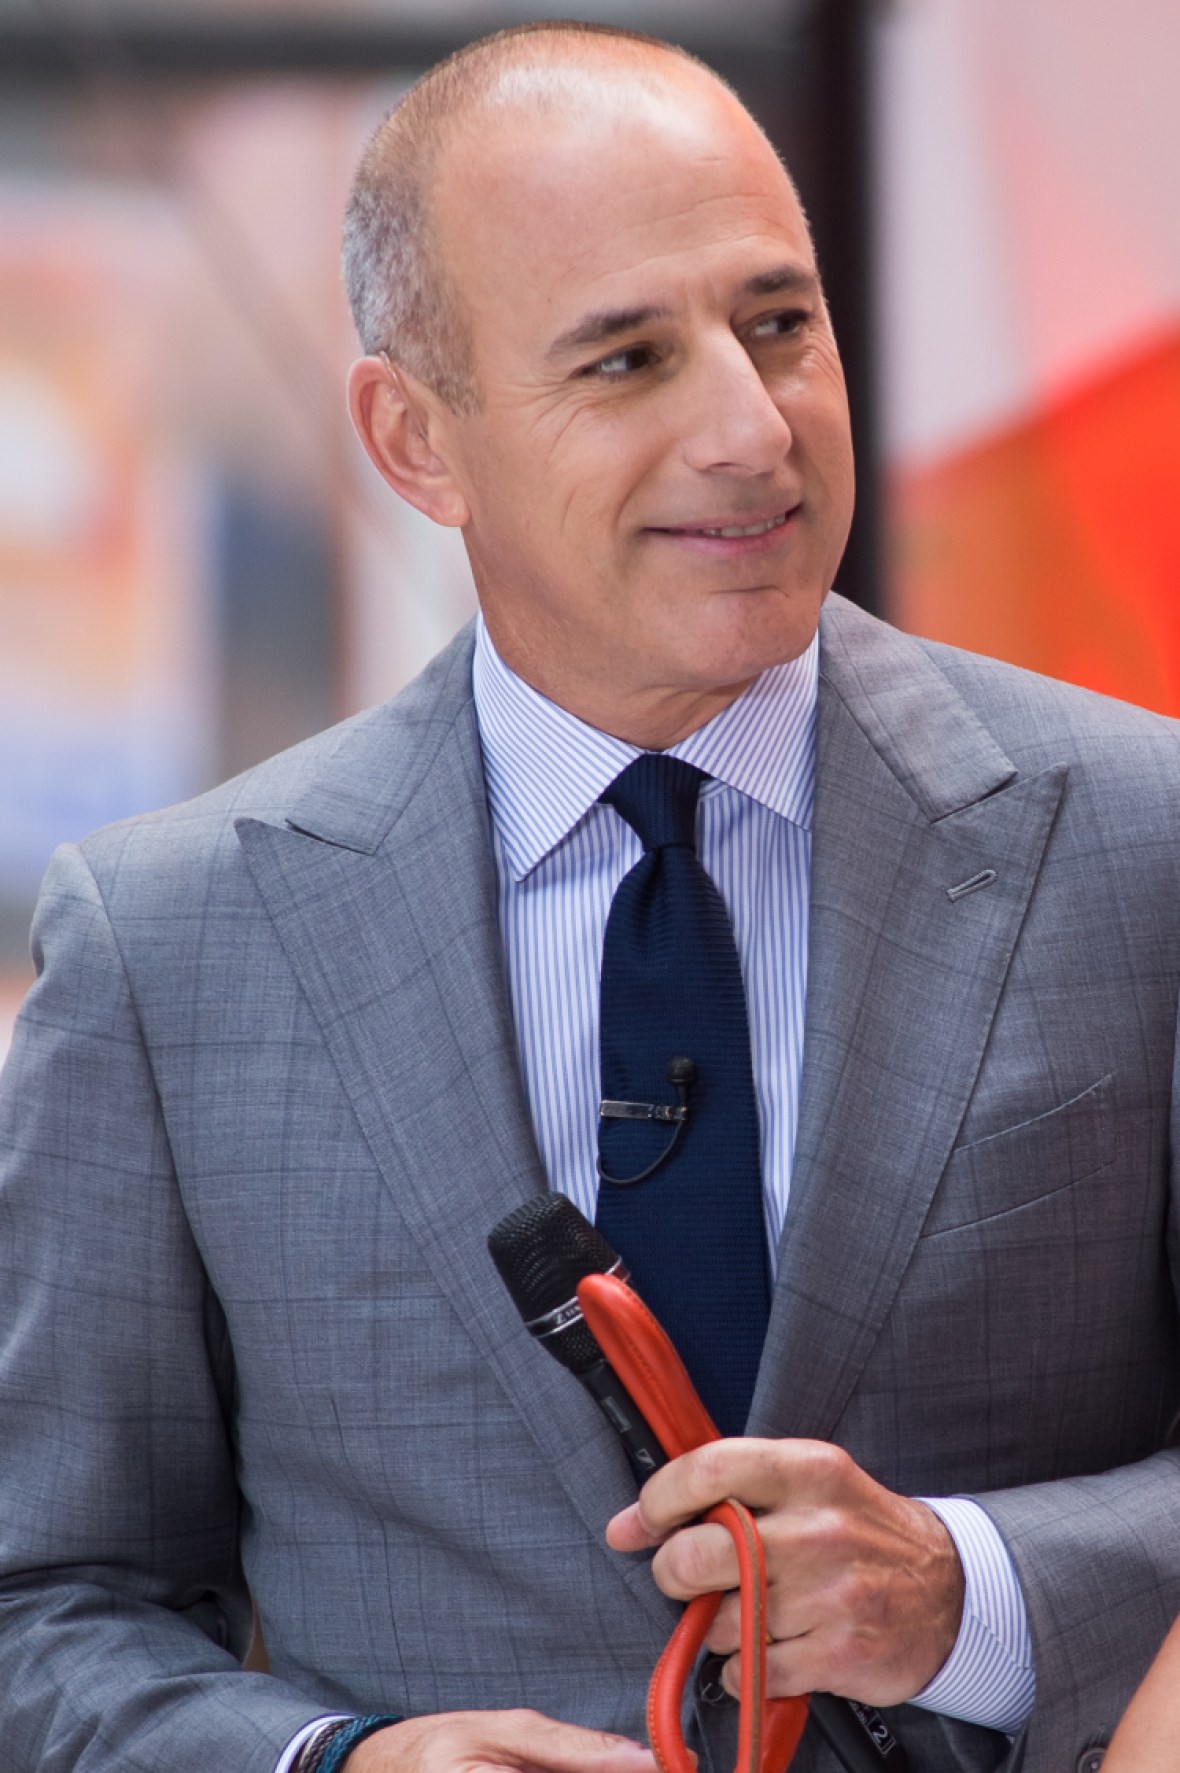 How Much Did Matt Lauer Make? Inside His Today Contract